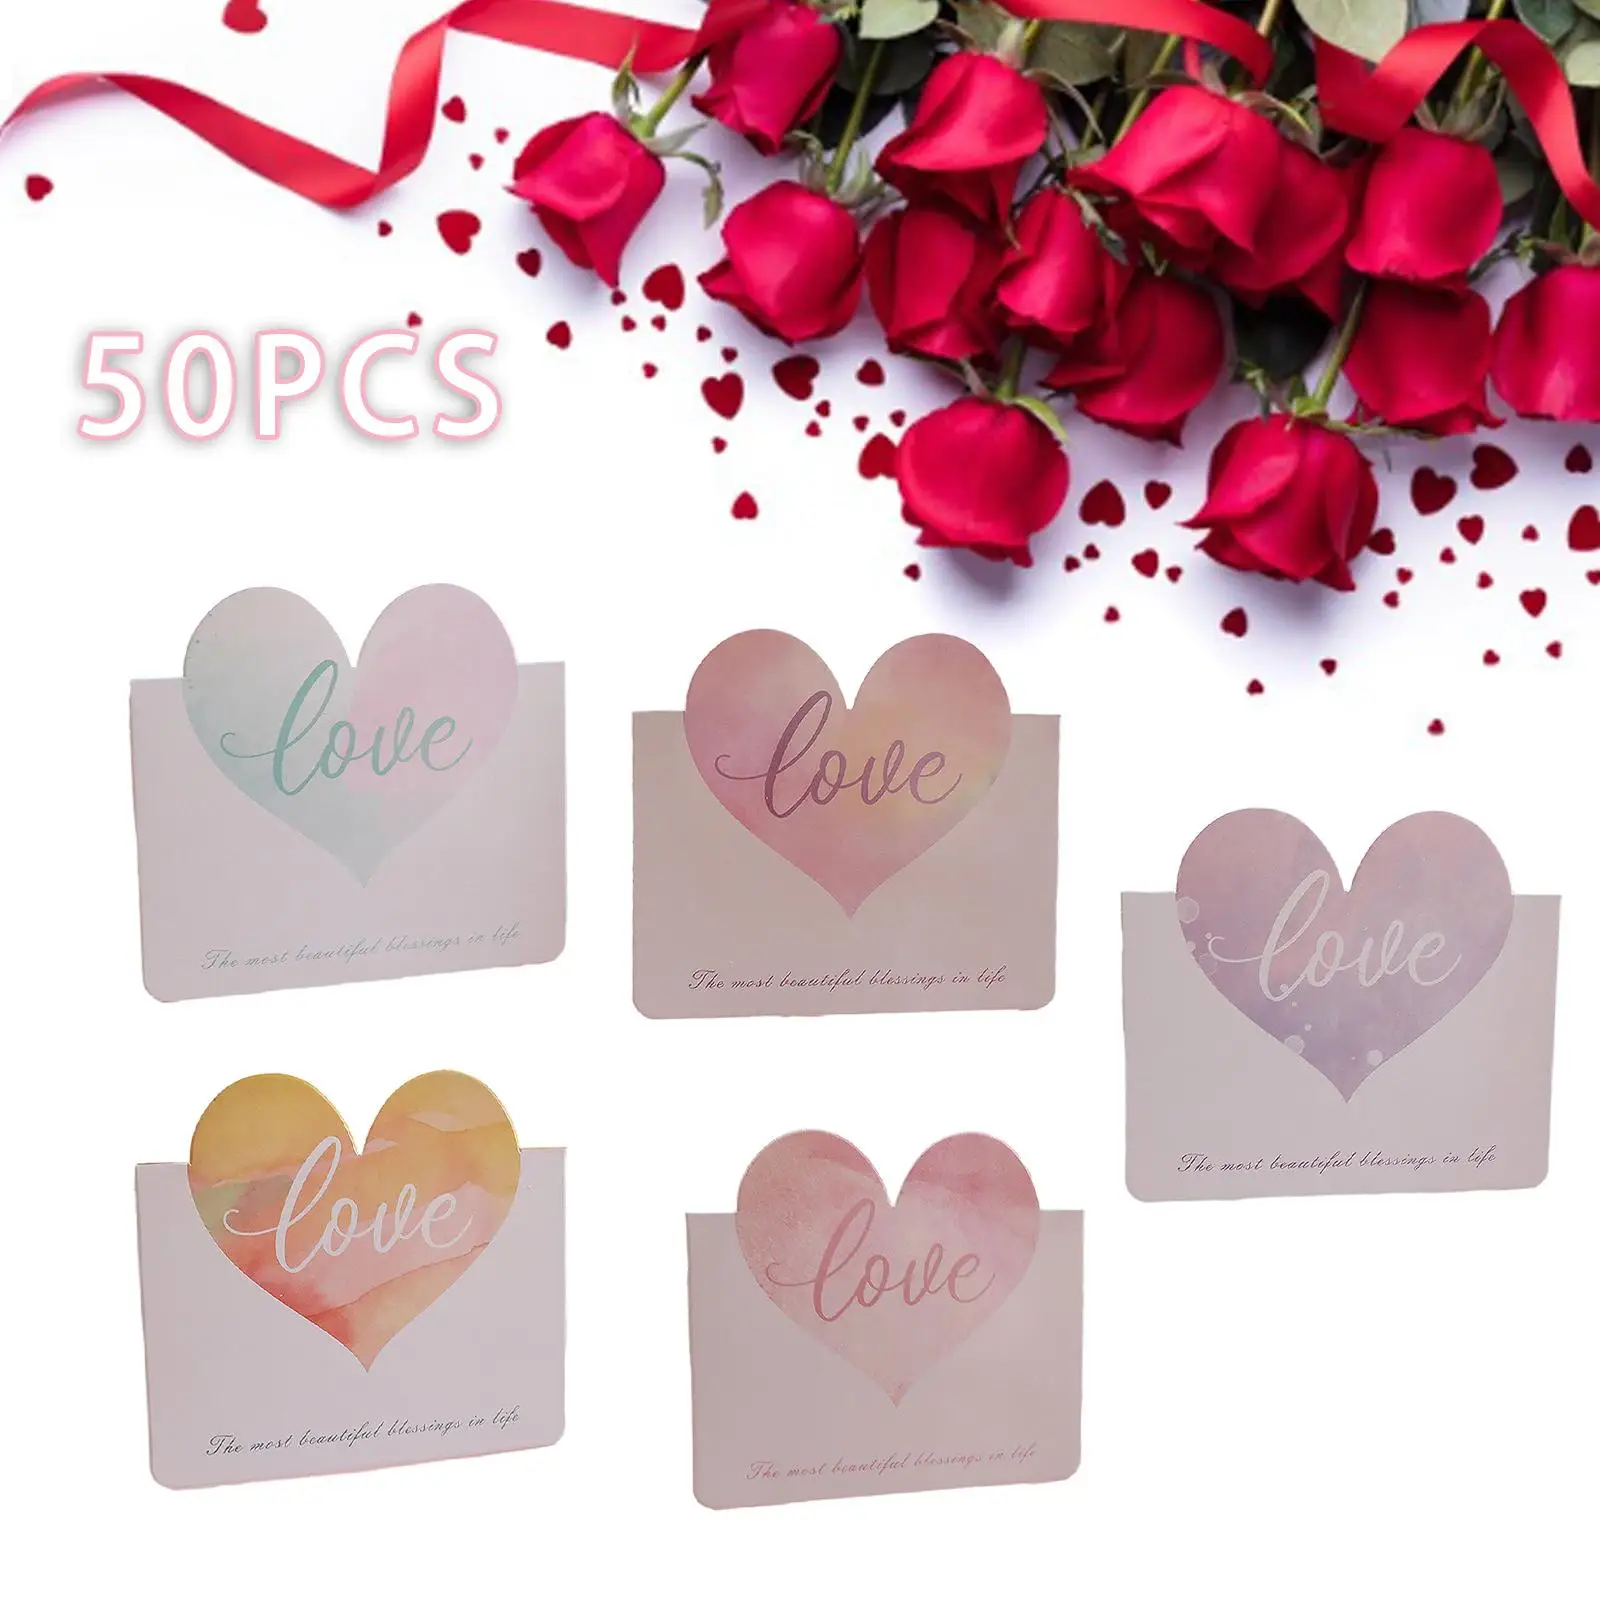 50 Pieces Valentines Day Cards Message Cards Love Greeting Cards Bulk for Anniversary Party Favors Flower Shop Thanksgiving